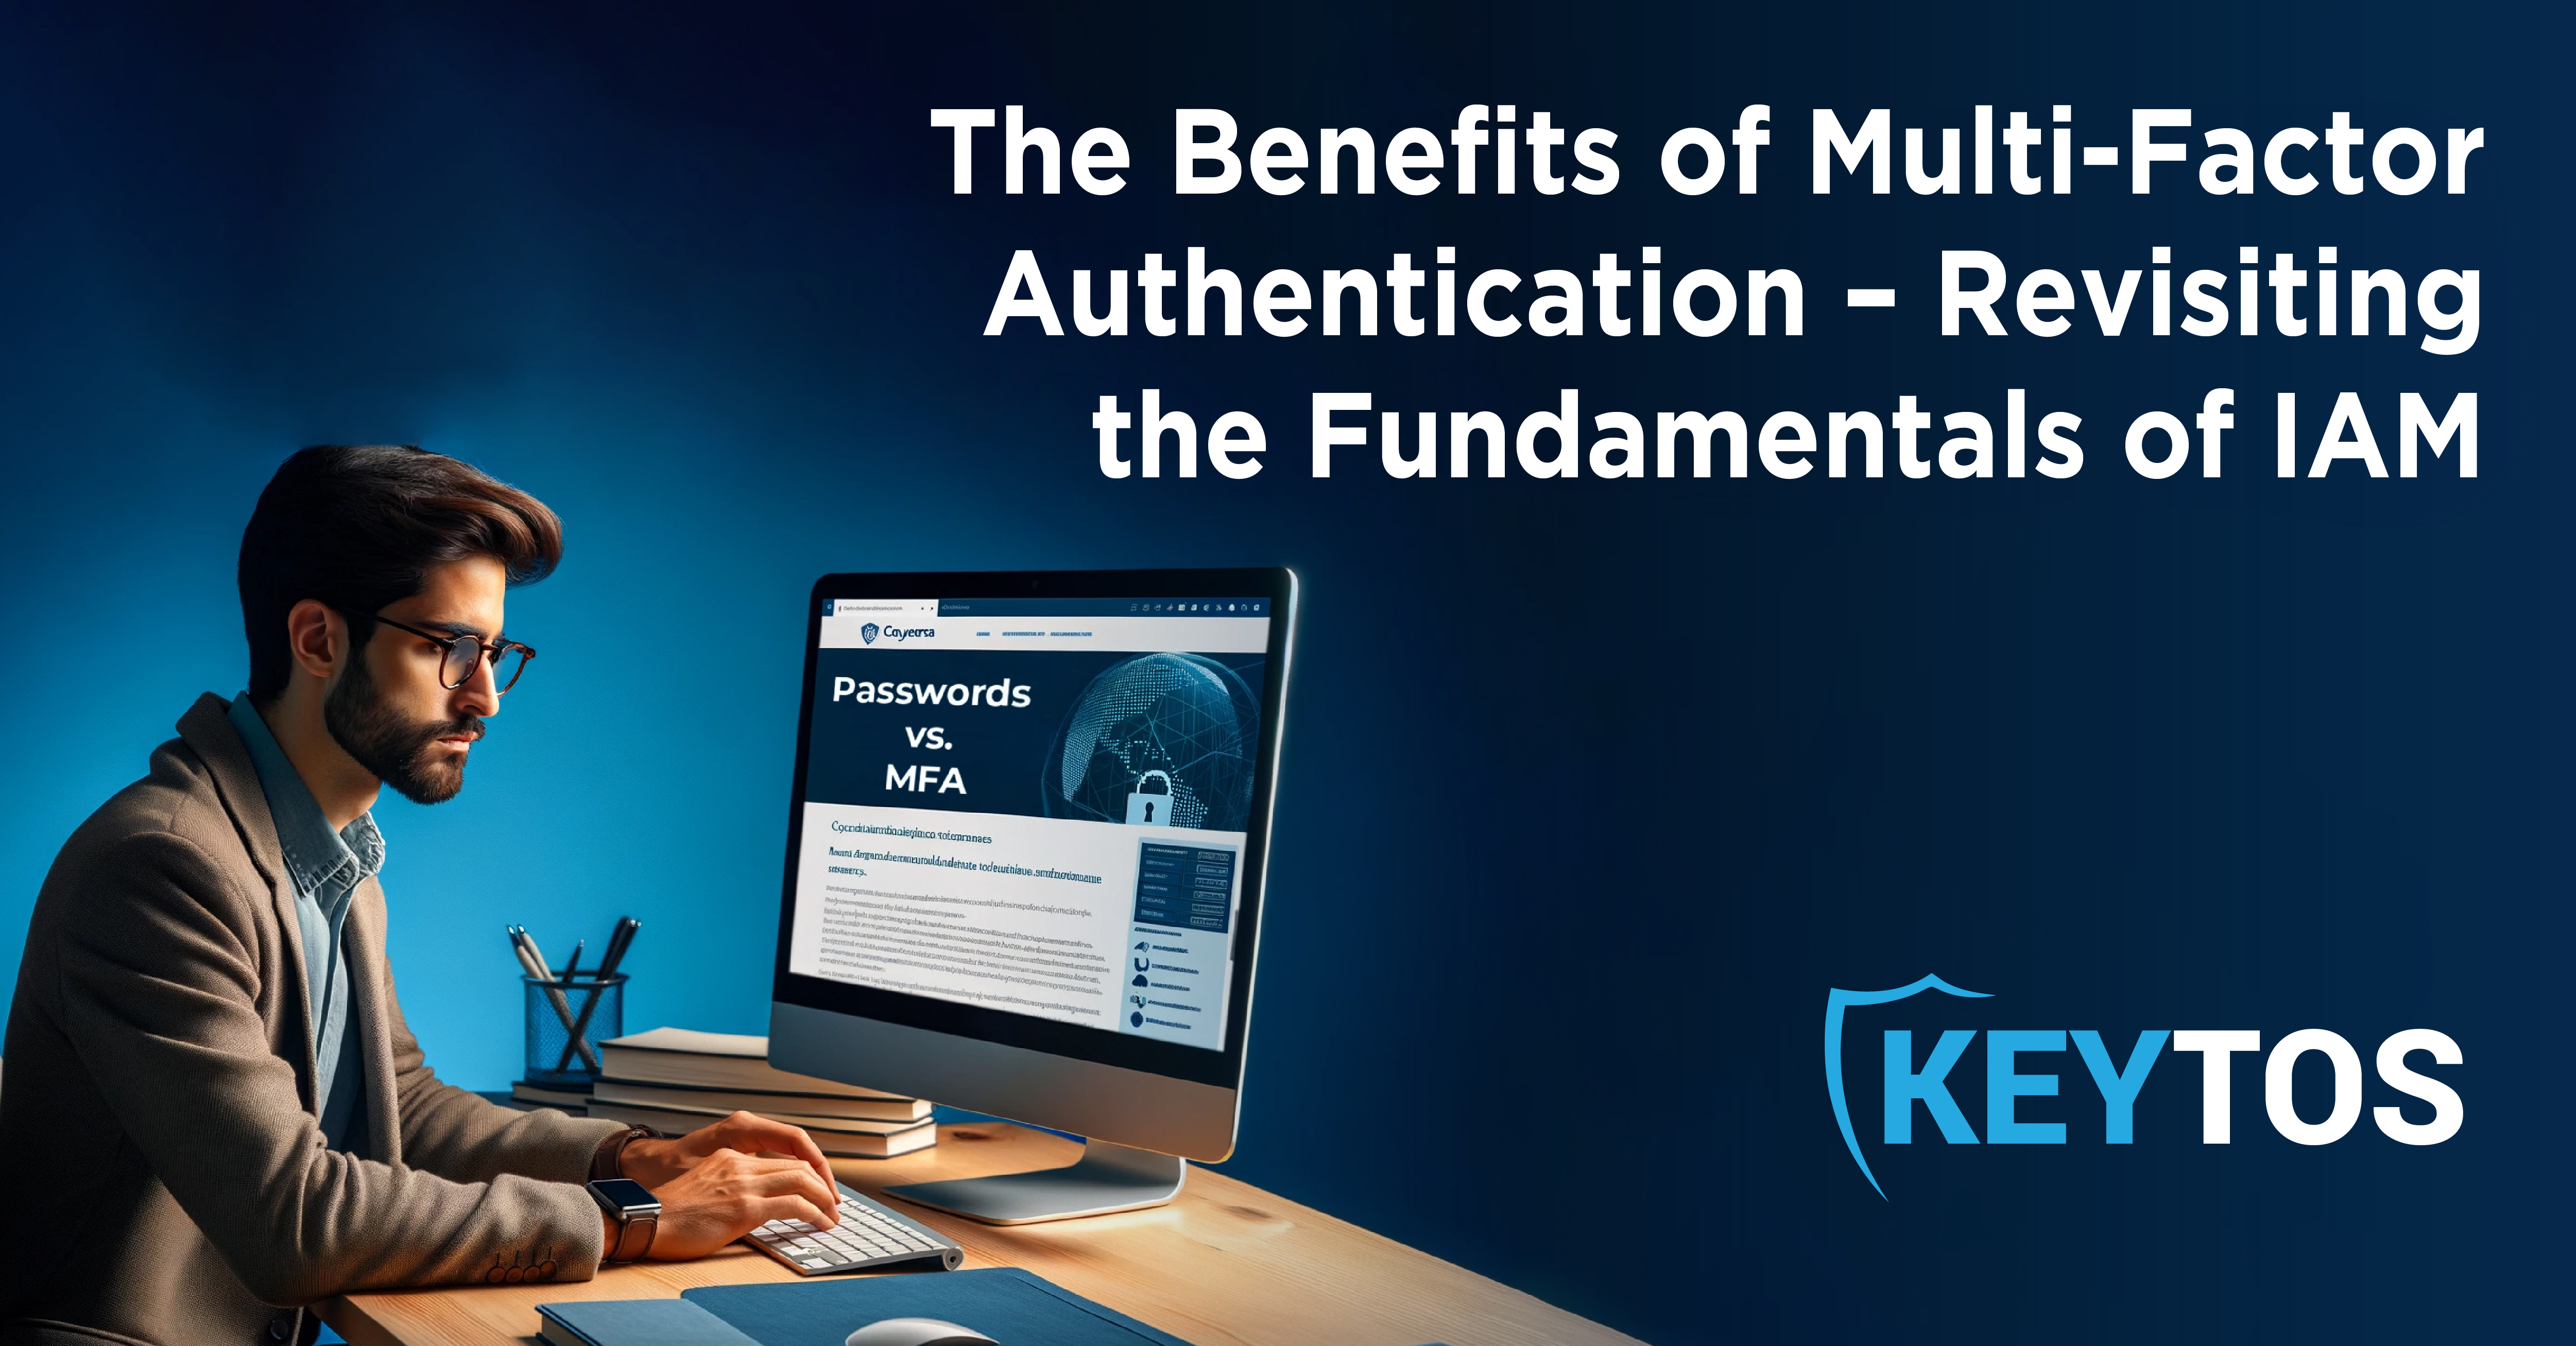 What Are the Benefits of MFA?